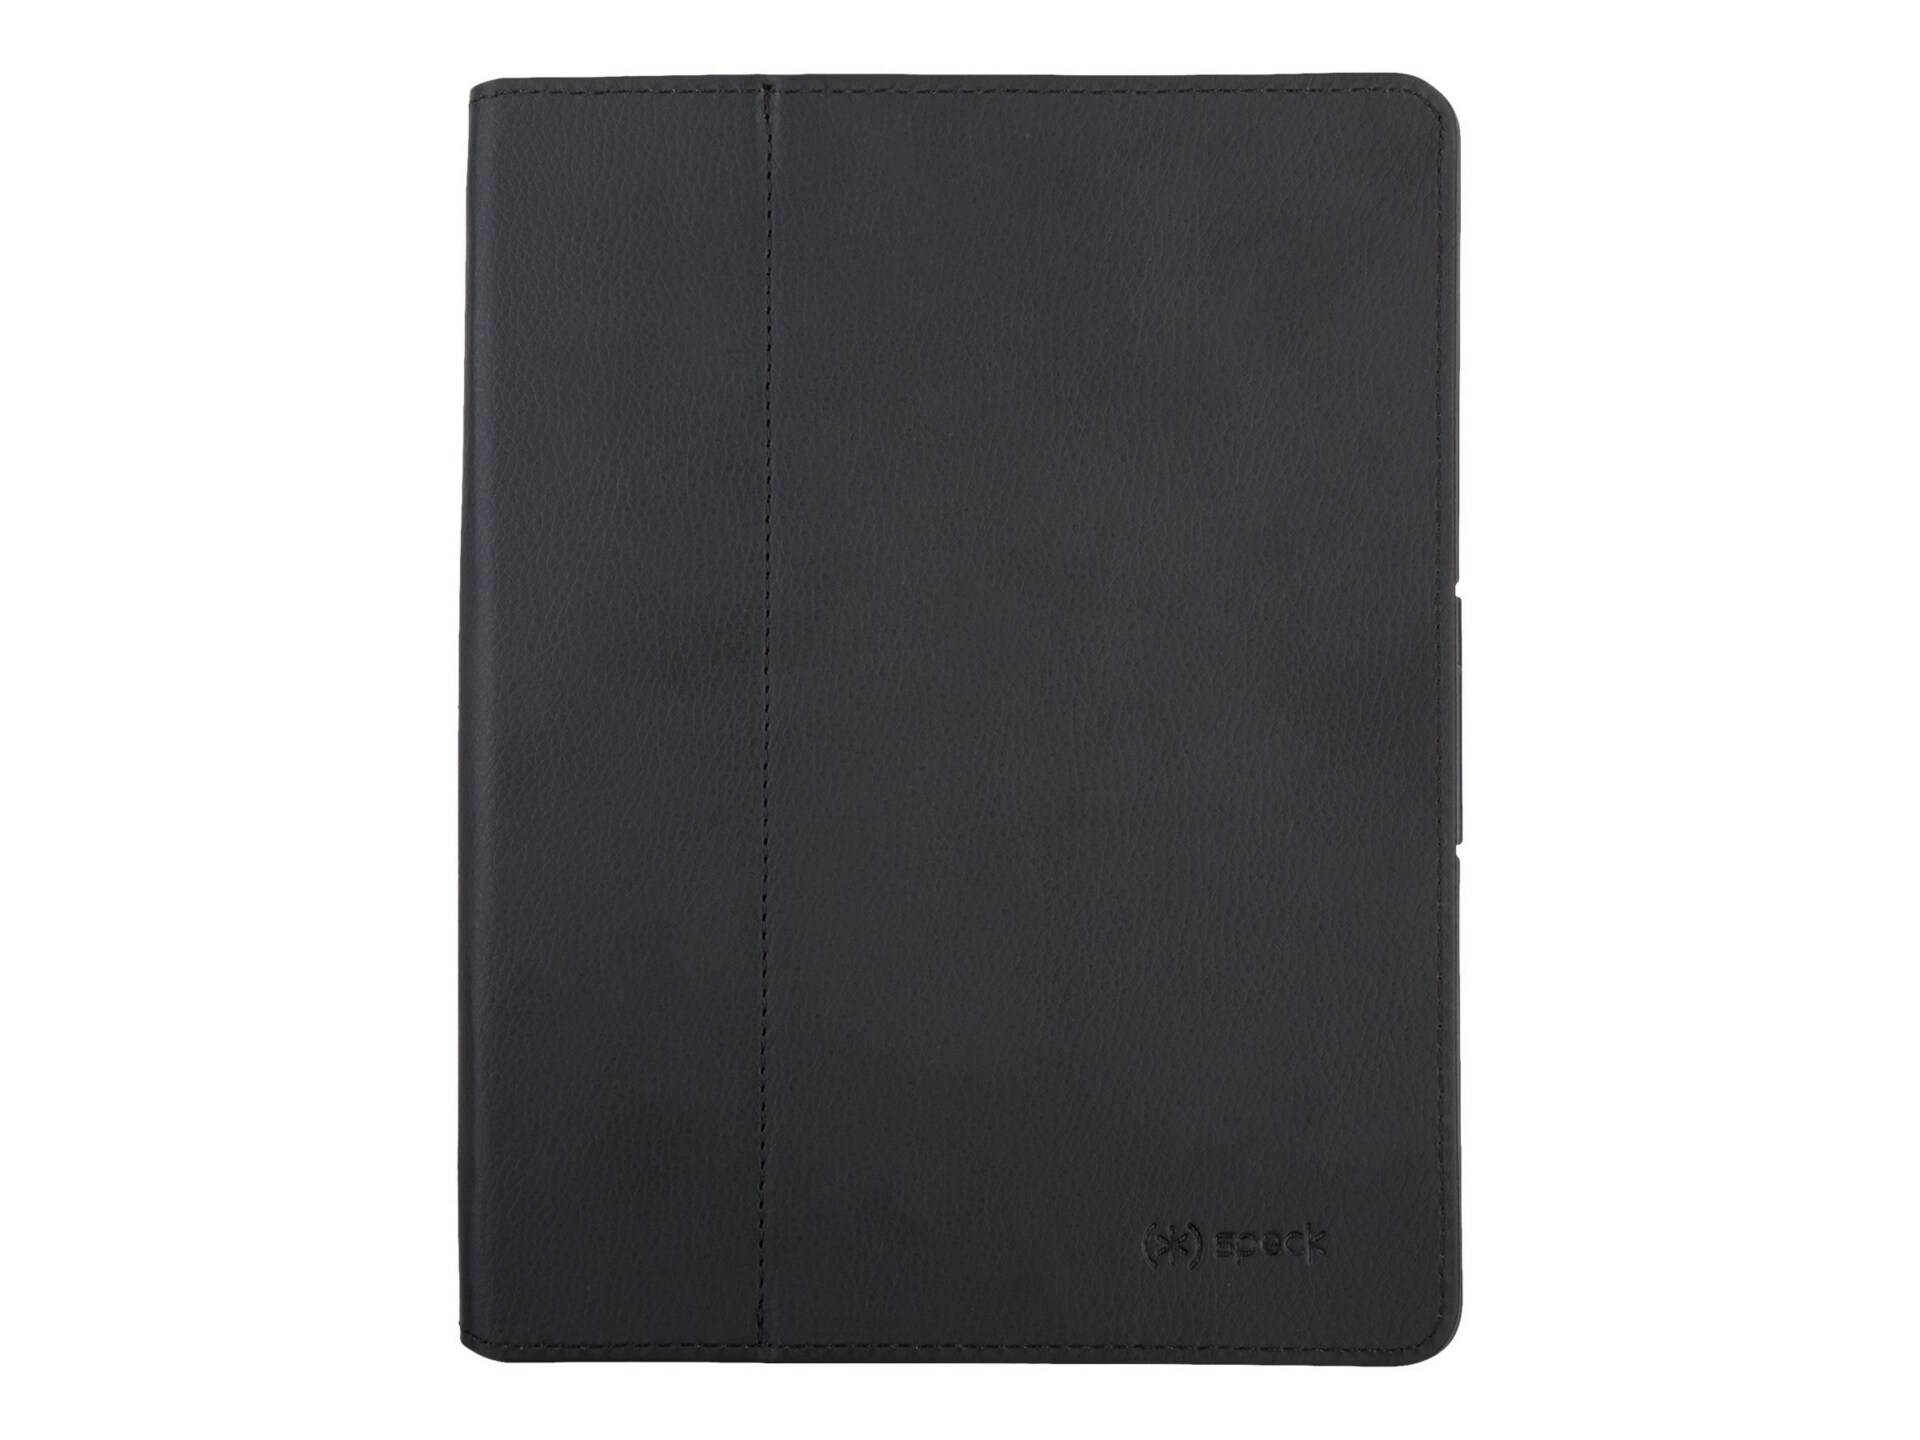 Speck FitFolio iPad 2/3/4 - flip cover for tablet